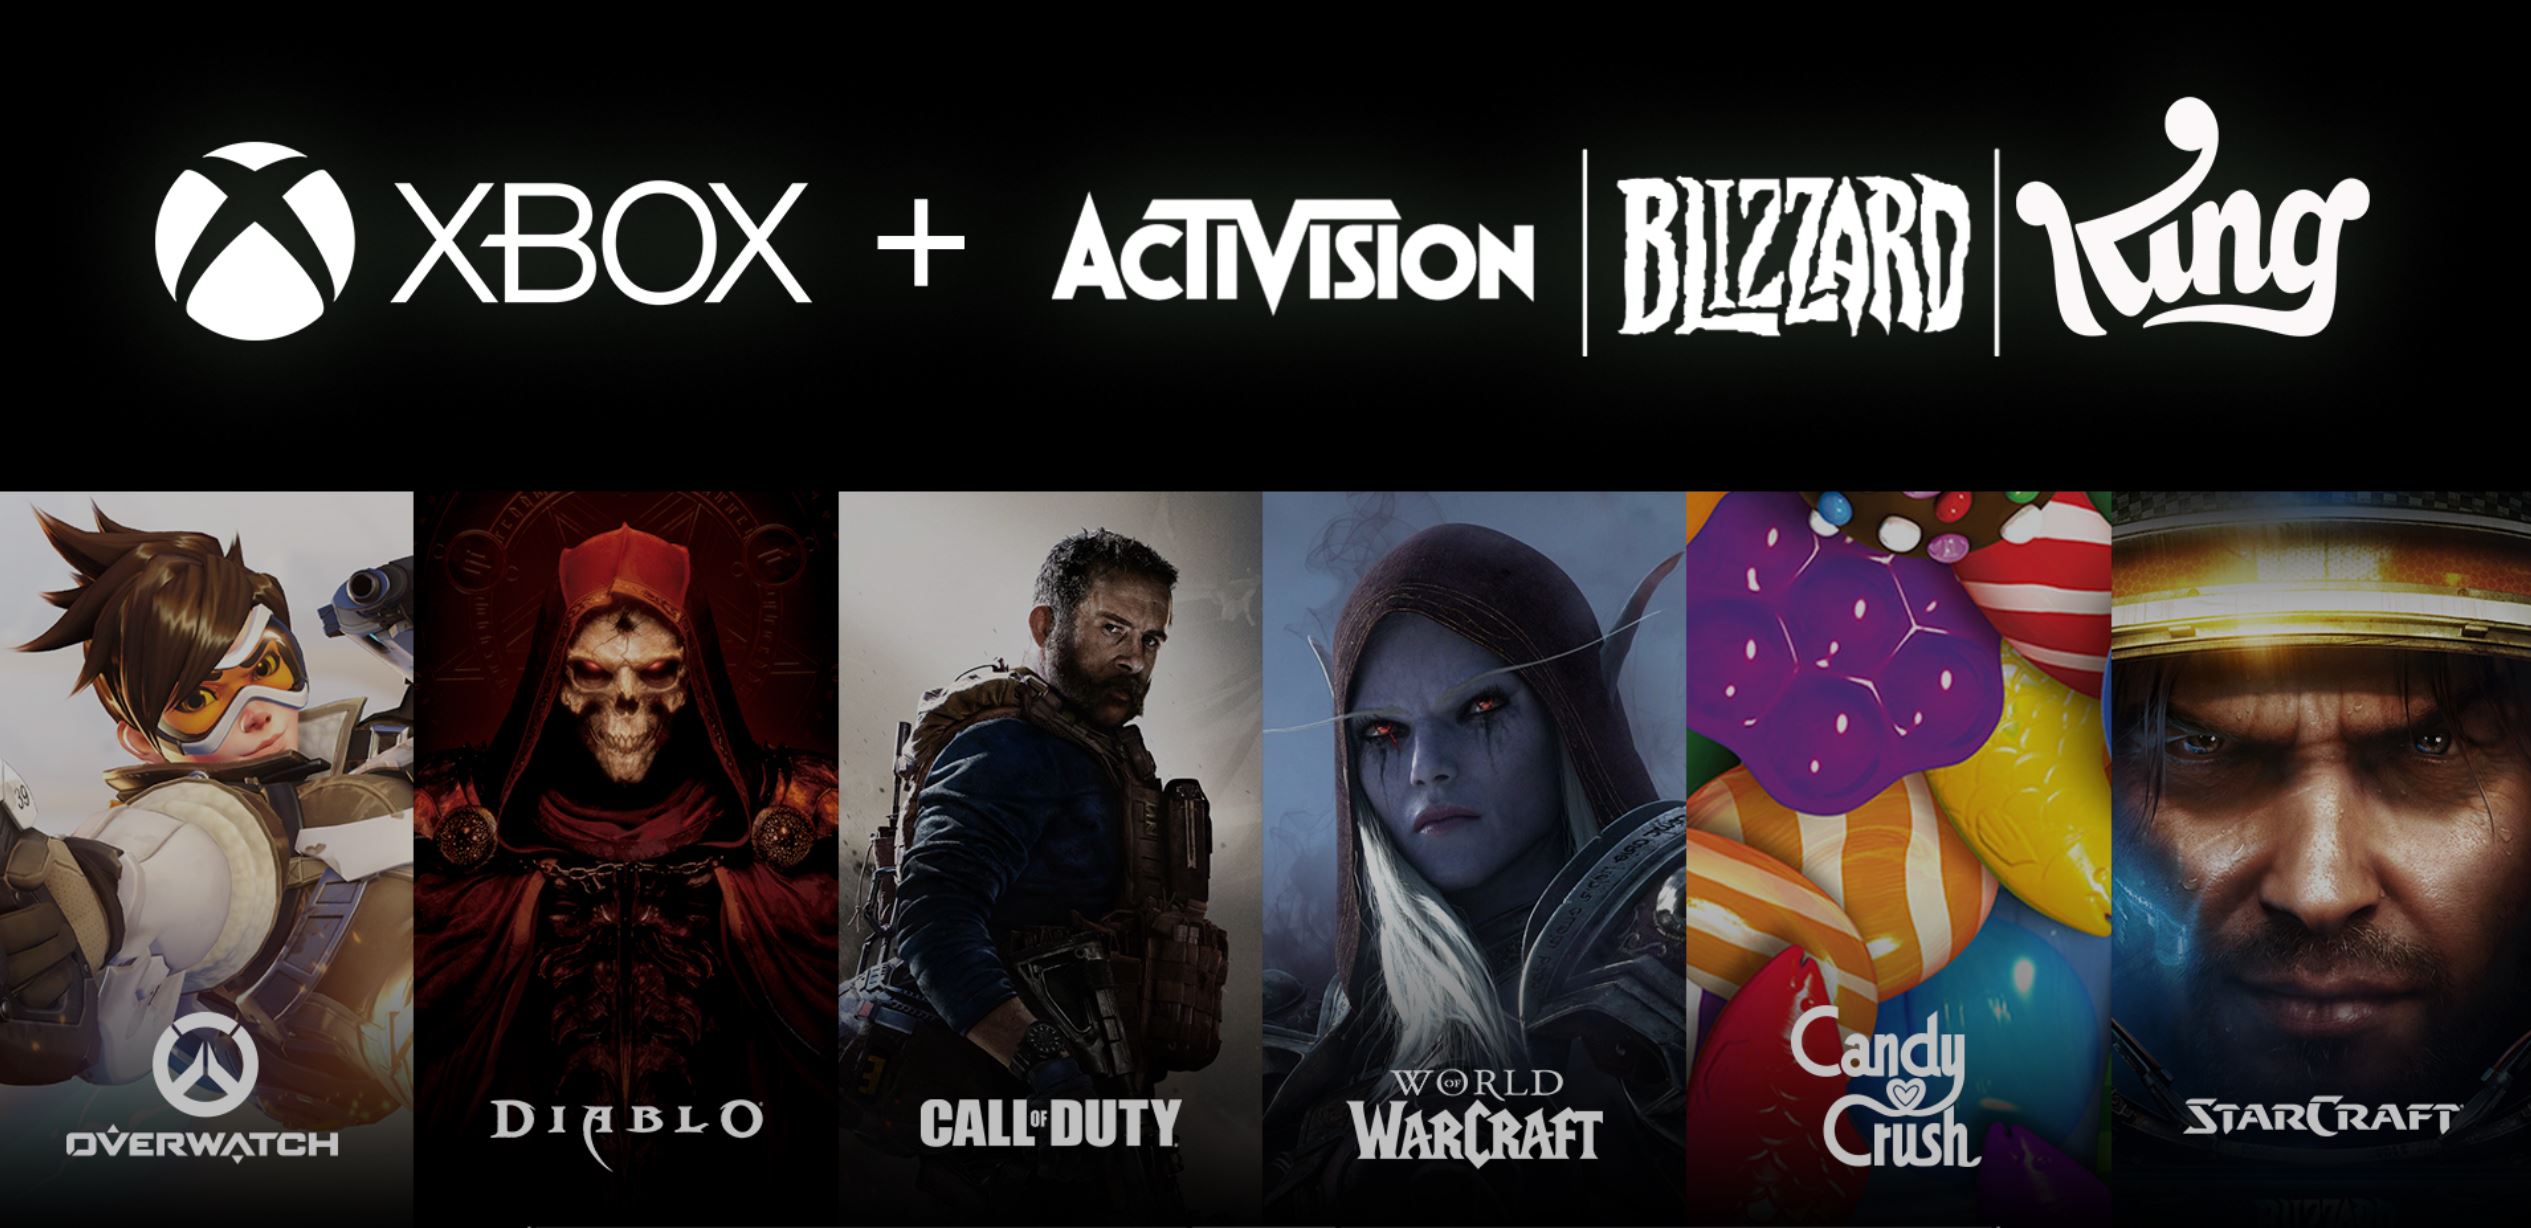 Microsoft’s acquisition of Activision may not be such a bad thing